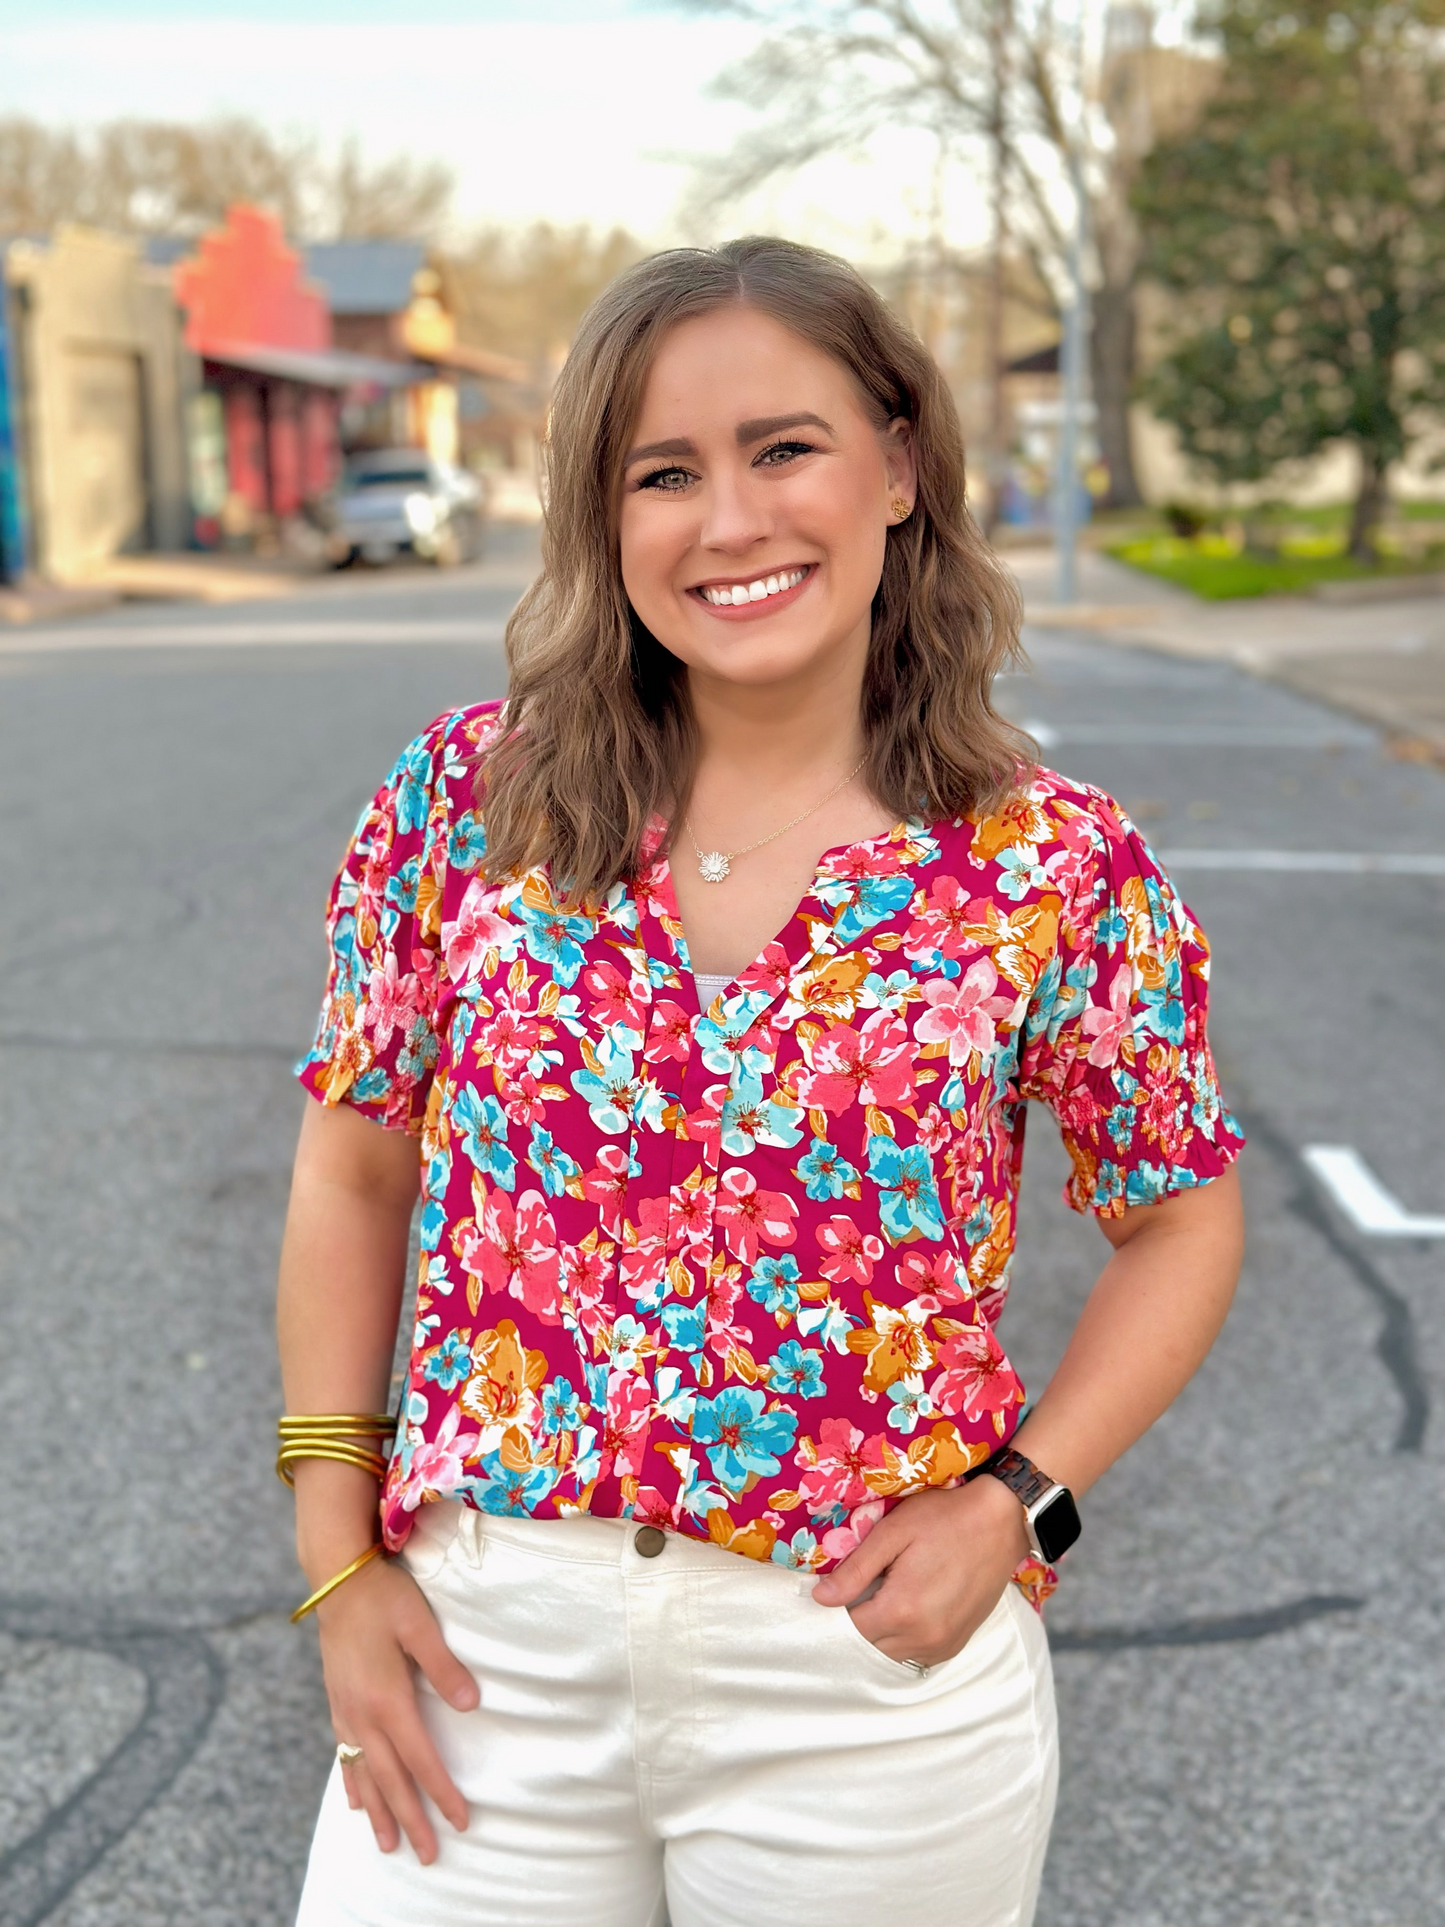 Order Washco Apparel Wholesale - The Connie Top. A print we couldn’t resist! The Connie top by Washco Apparel is a beautiful floral top with short sleeves and smocked detailing around the cuff. This top is great for any occasion!